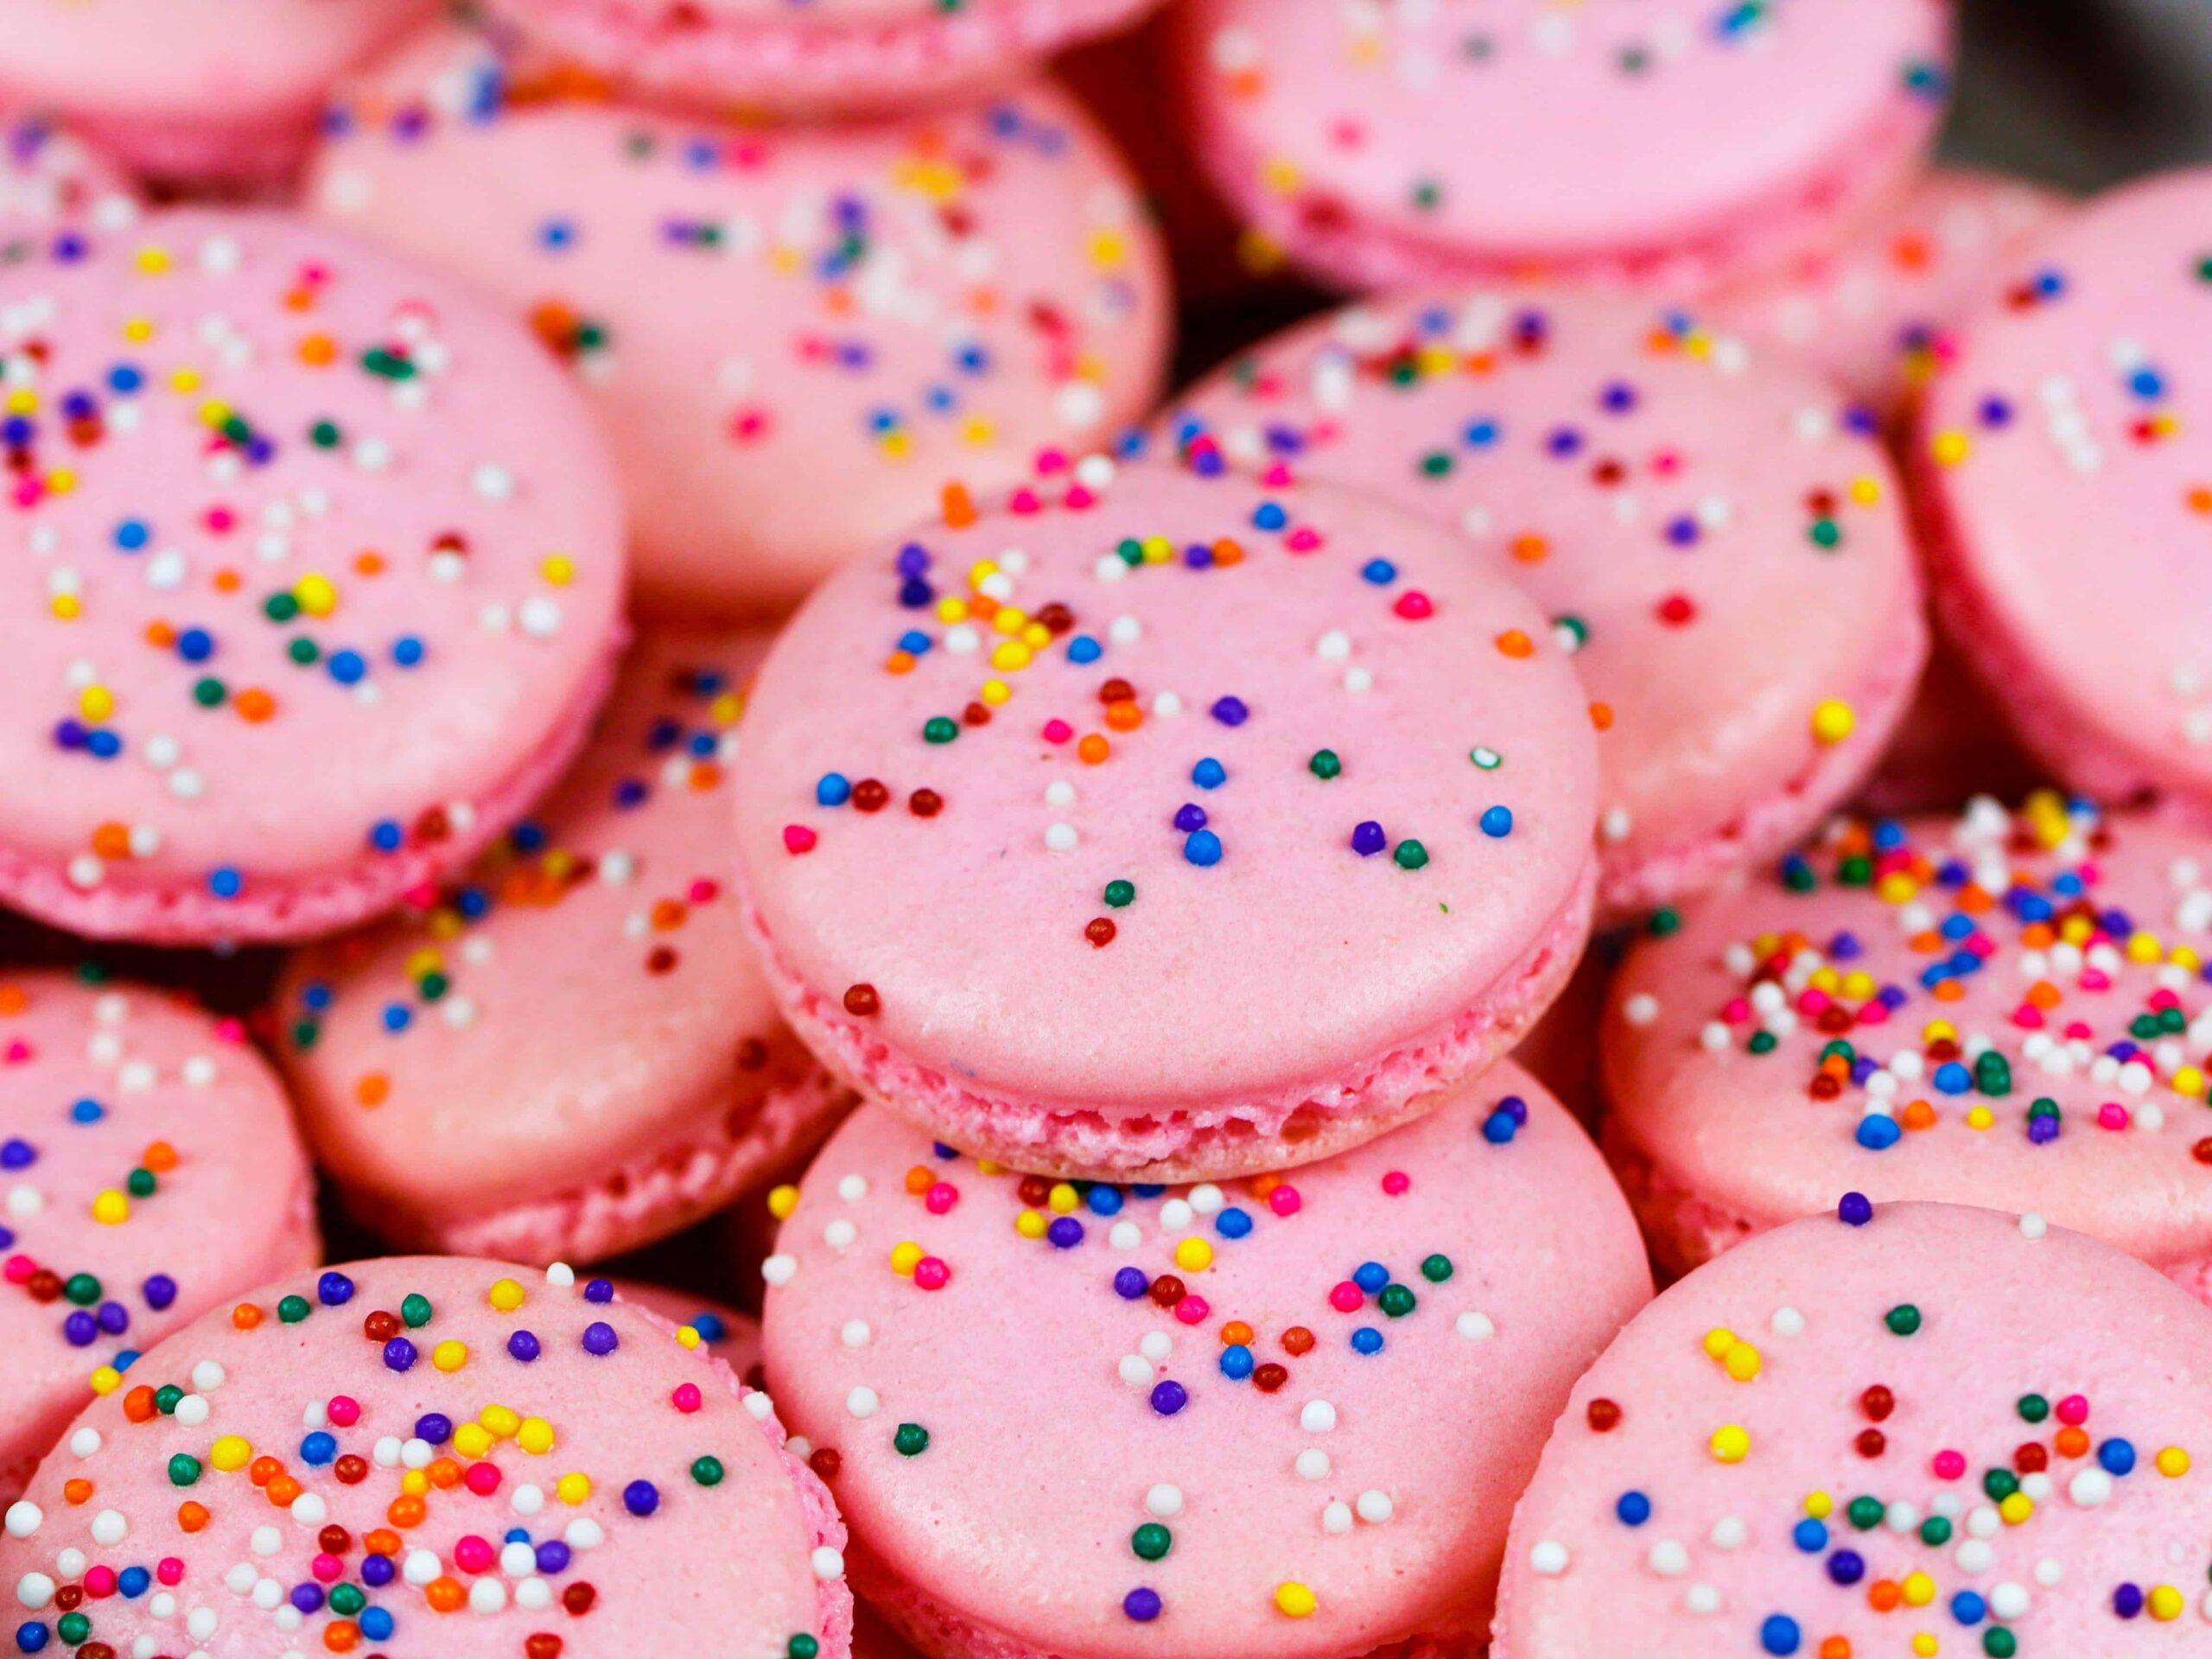 image of birthday cake macarons stacked on a plate